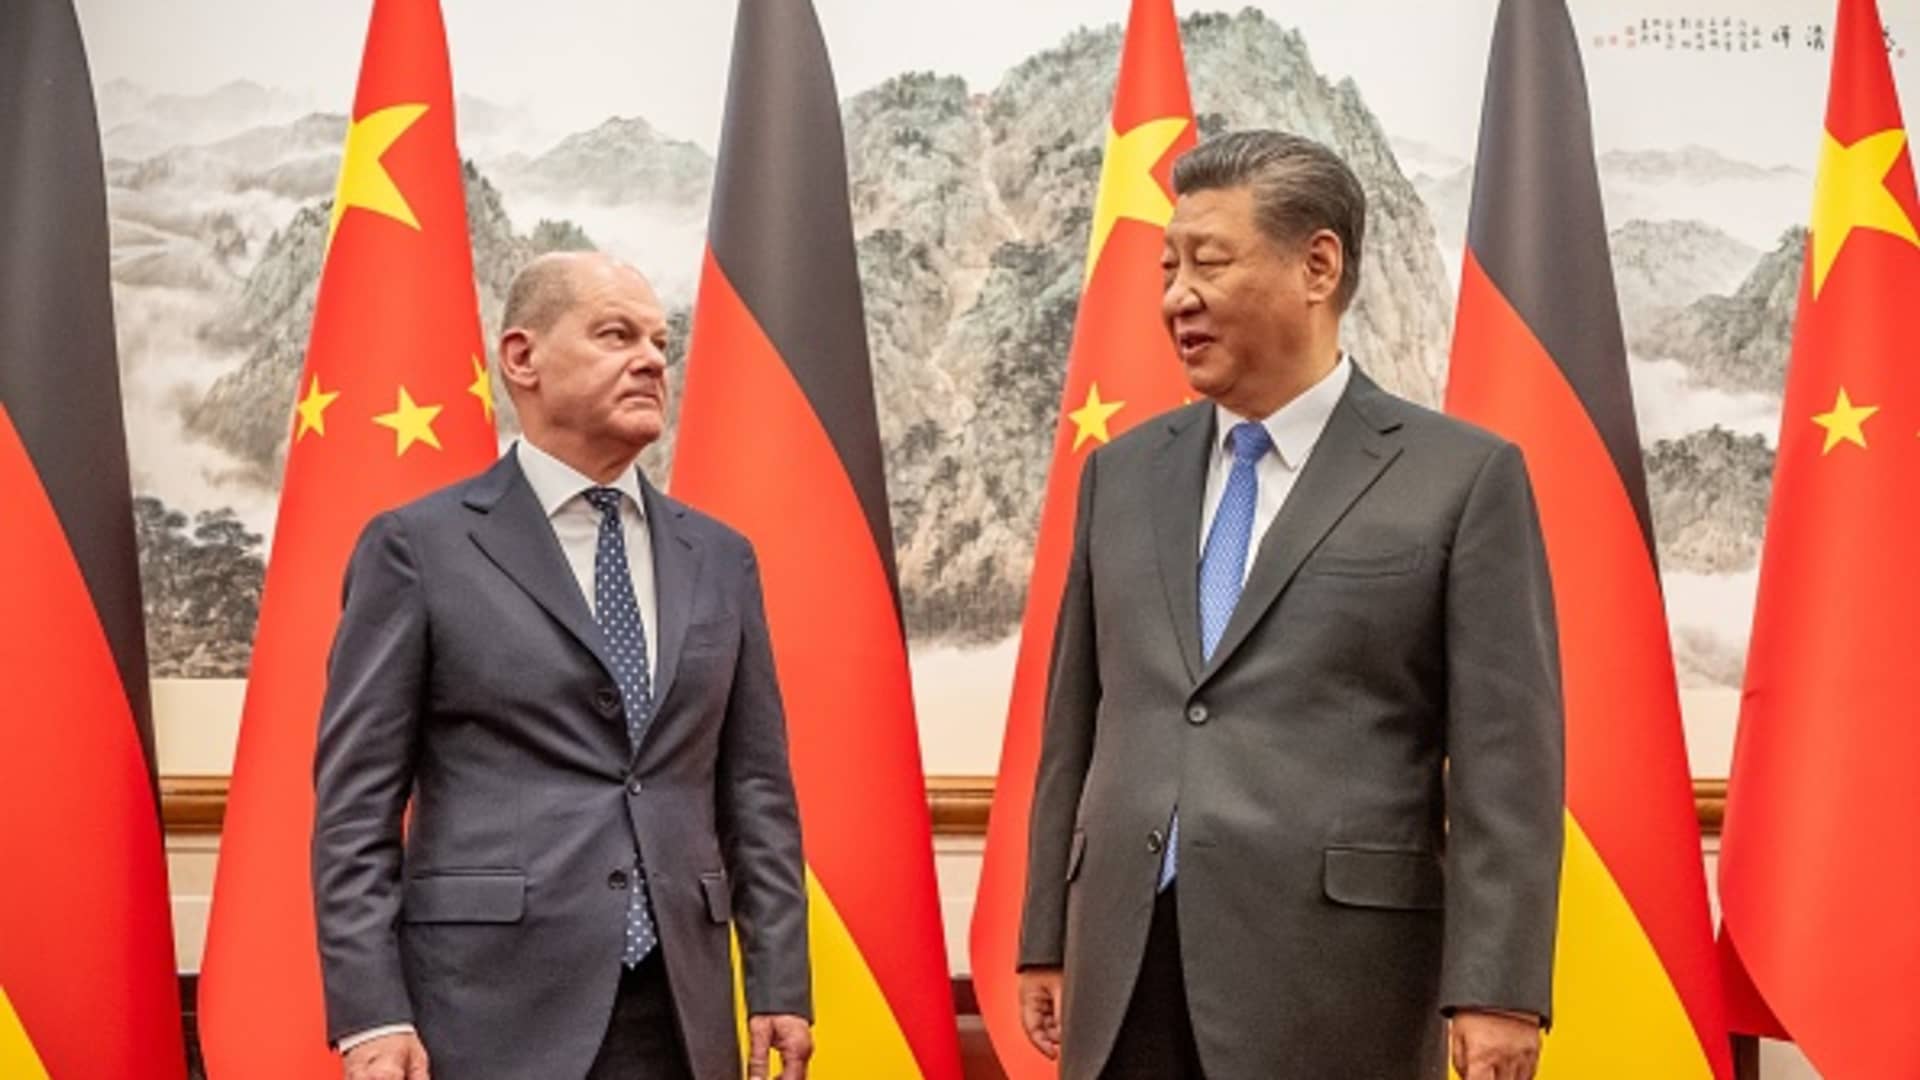 German Chancellor Olaf Scholz is received by Xi Jinping, the president of China, at the State Guest House. The visit to Xi is the highlight of Scholz's three-day trip through China.